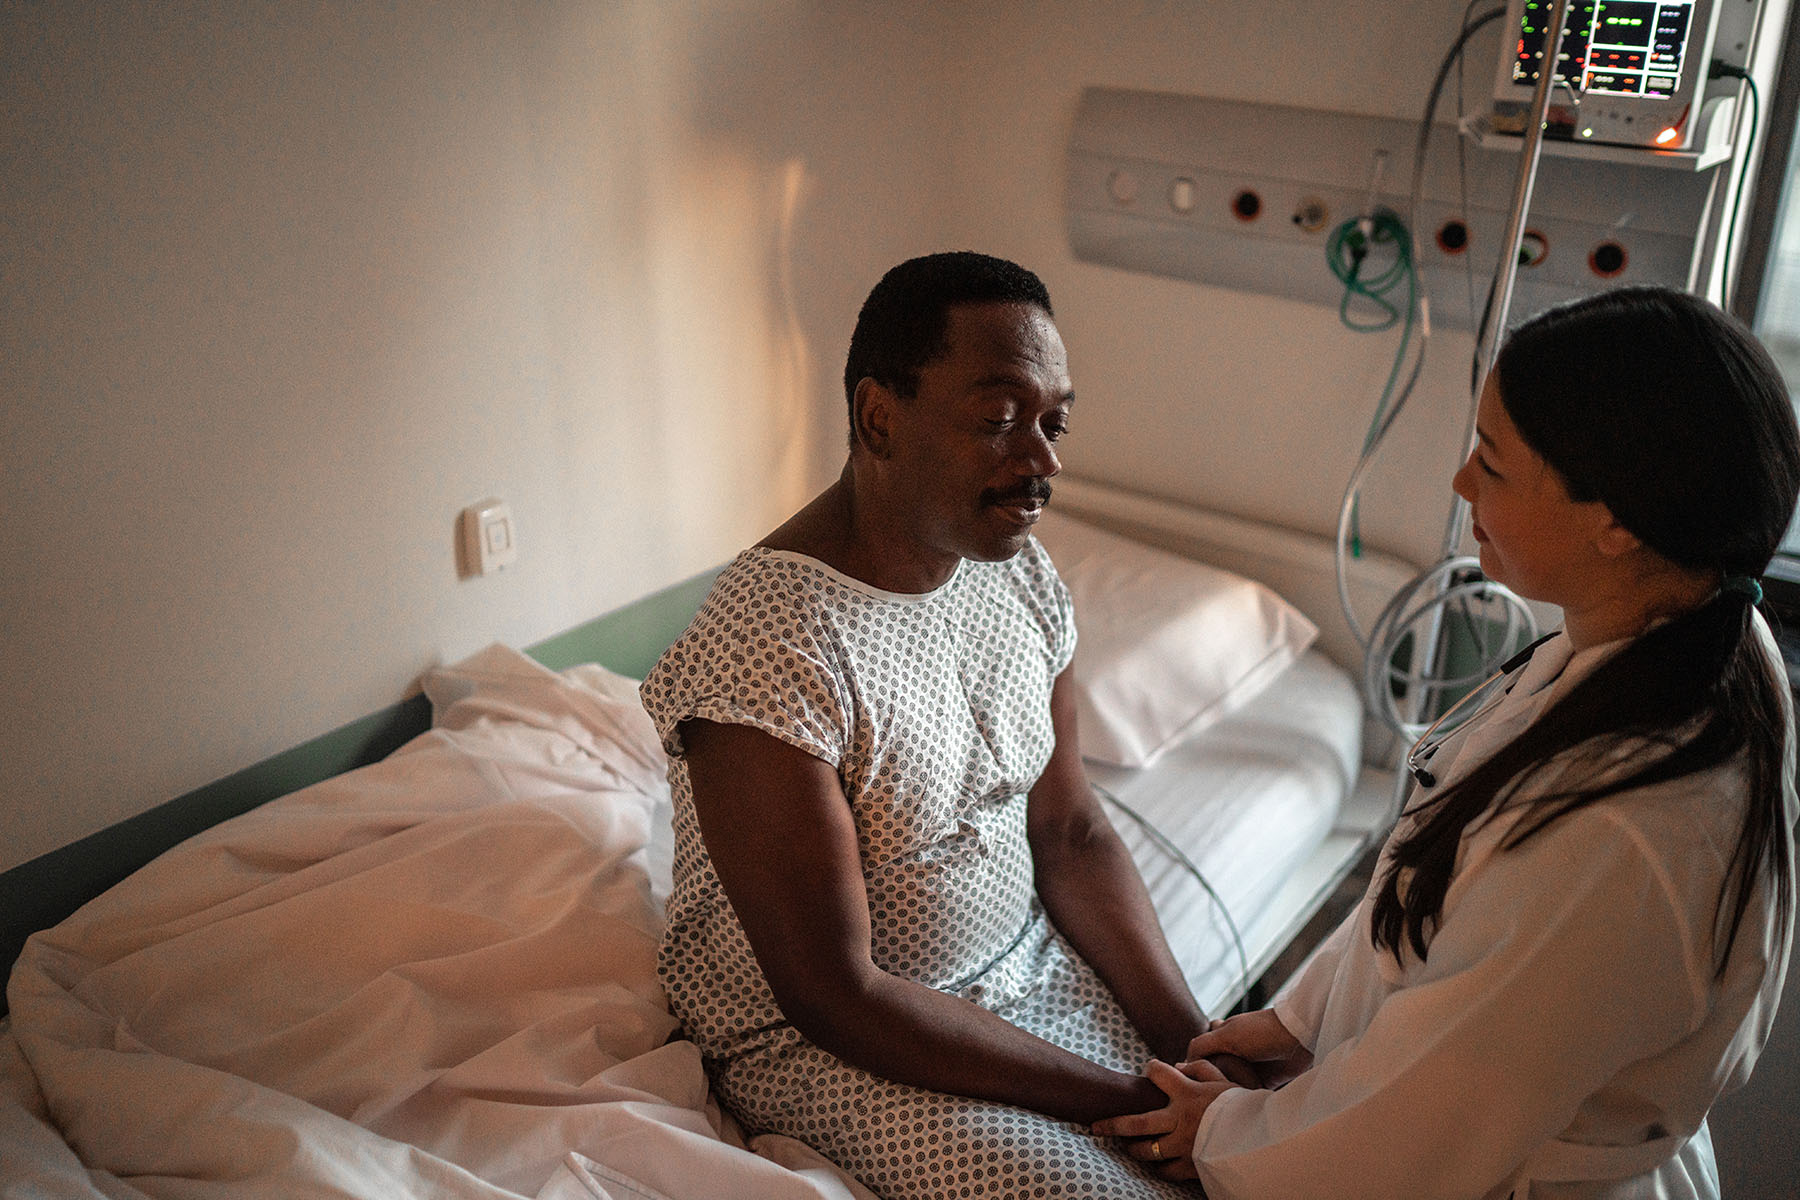 A patient sitting in a hospital gown on a bed while the doctor holds his hands